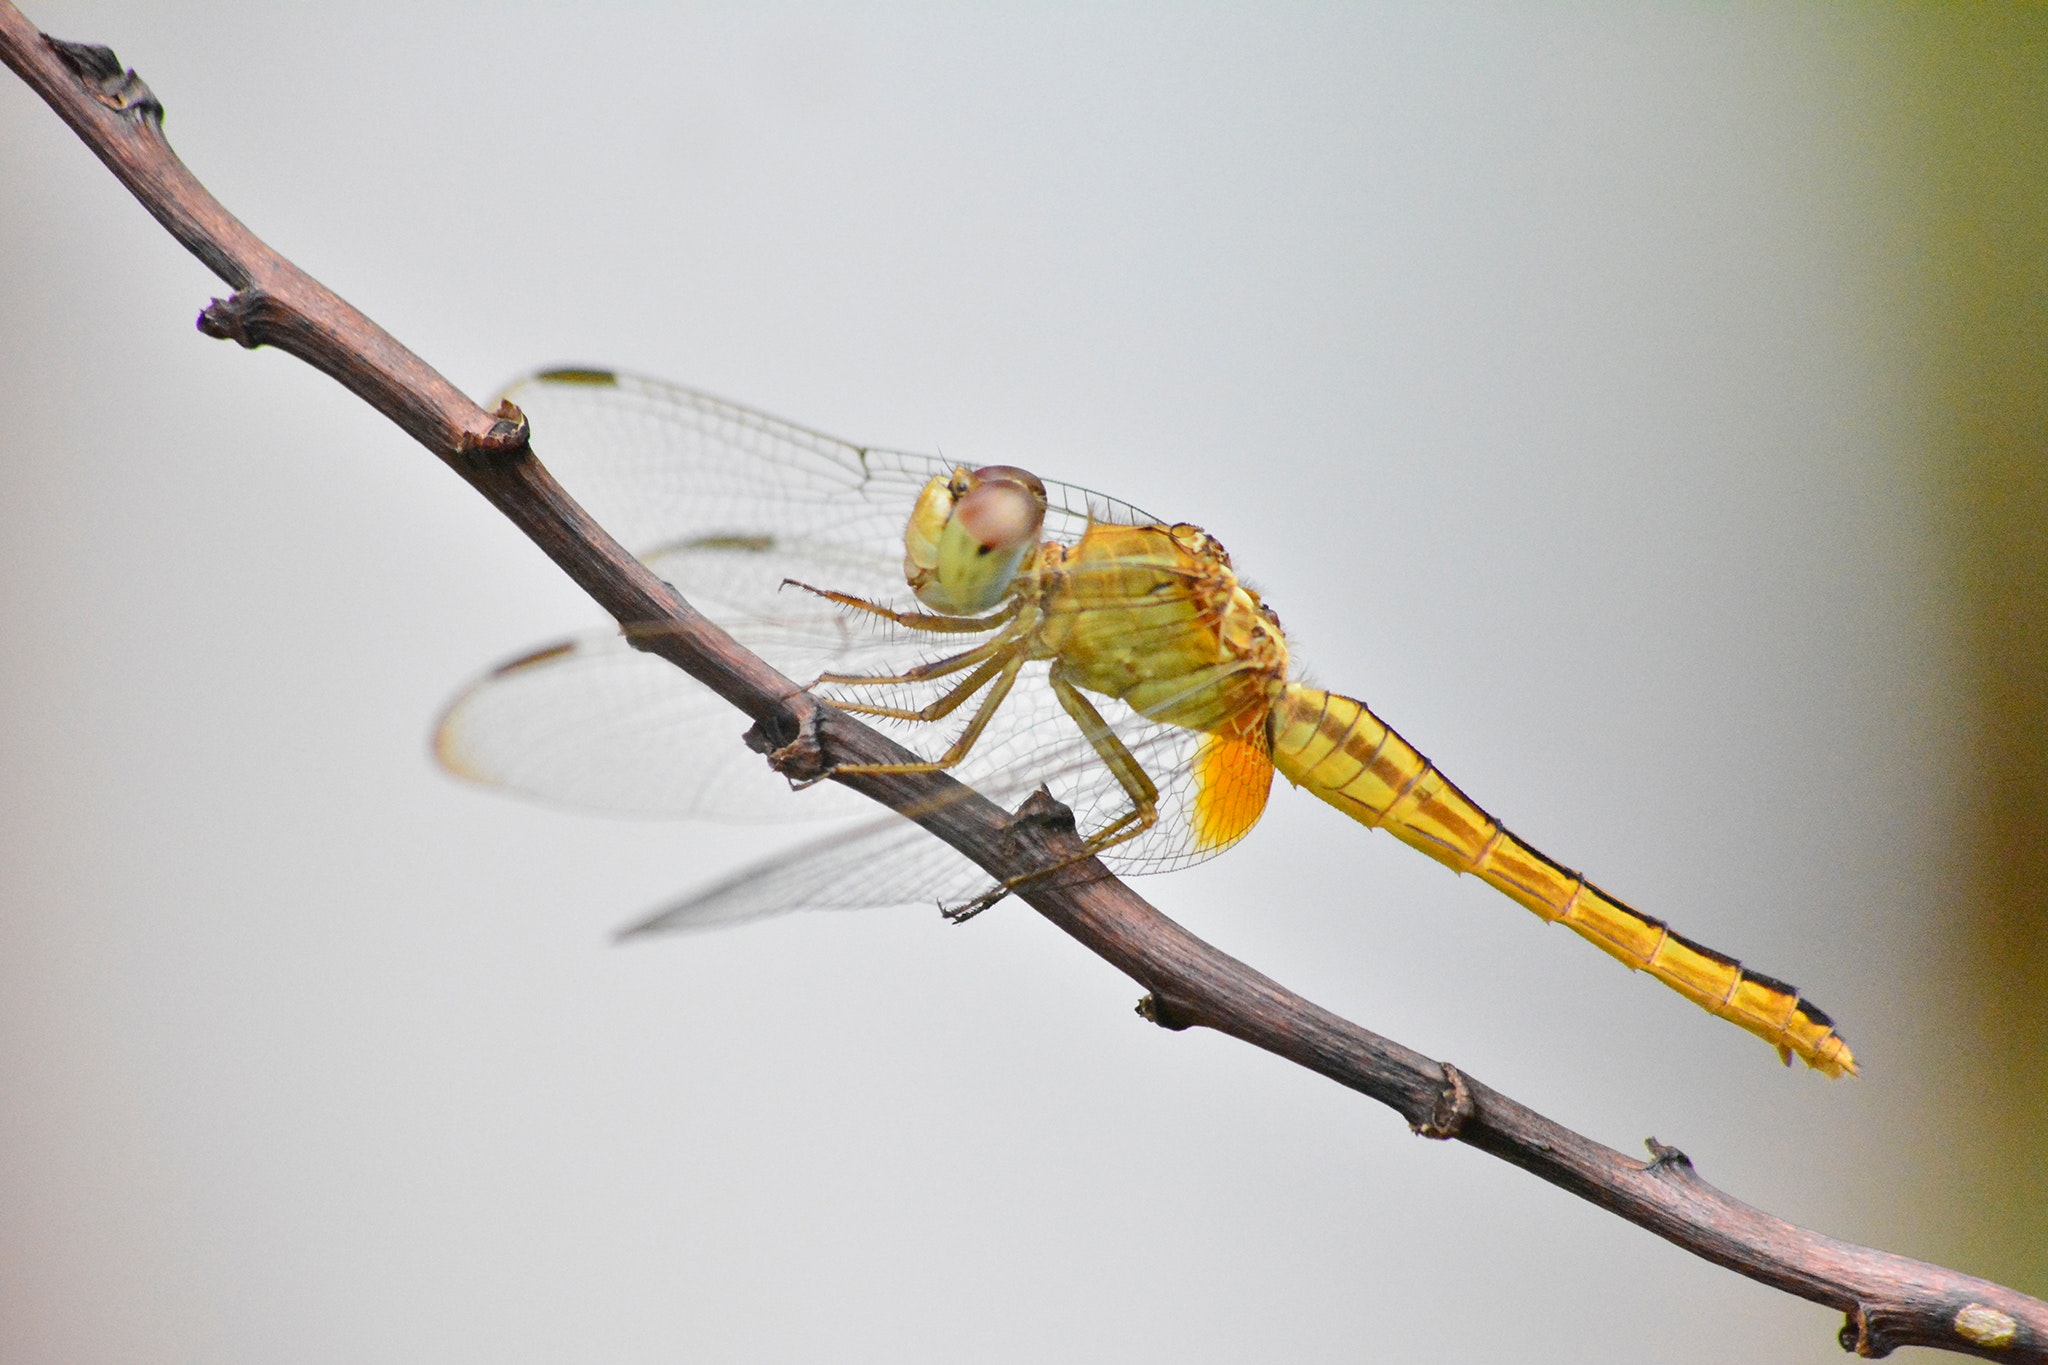 Green dragonfly on brown tree branch photo